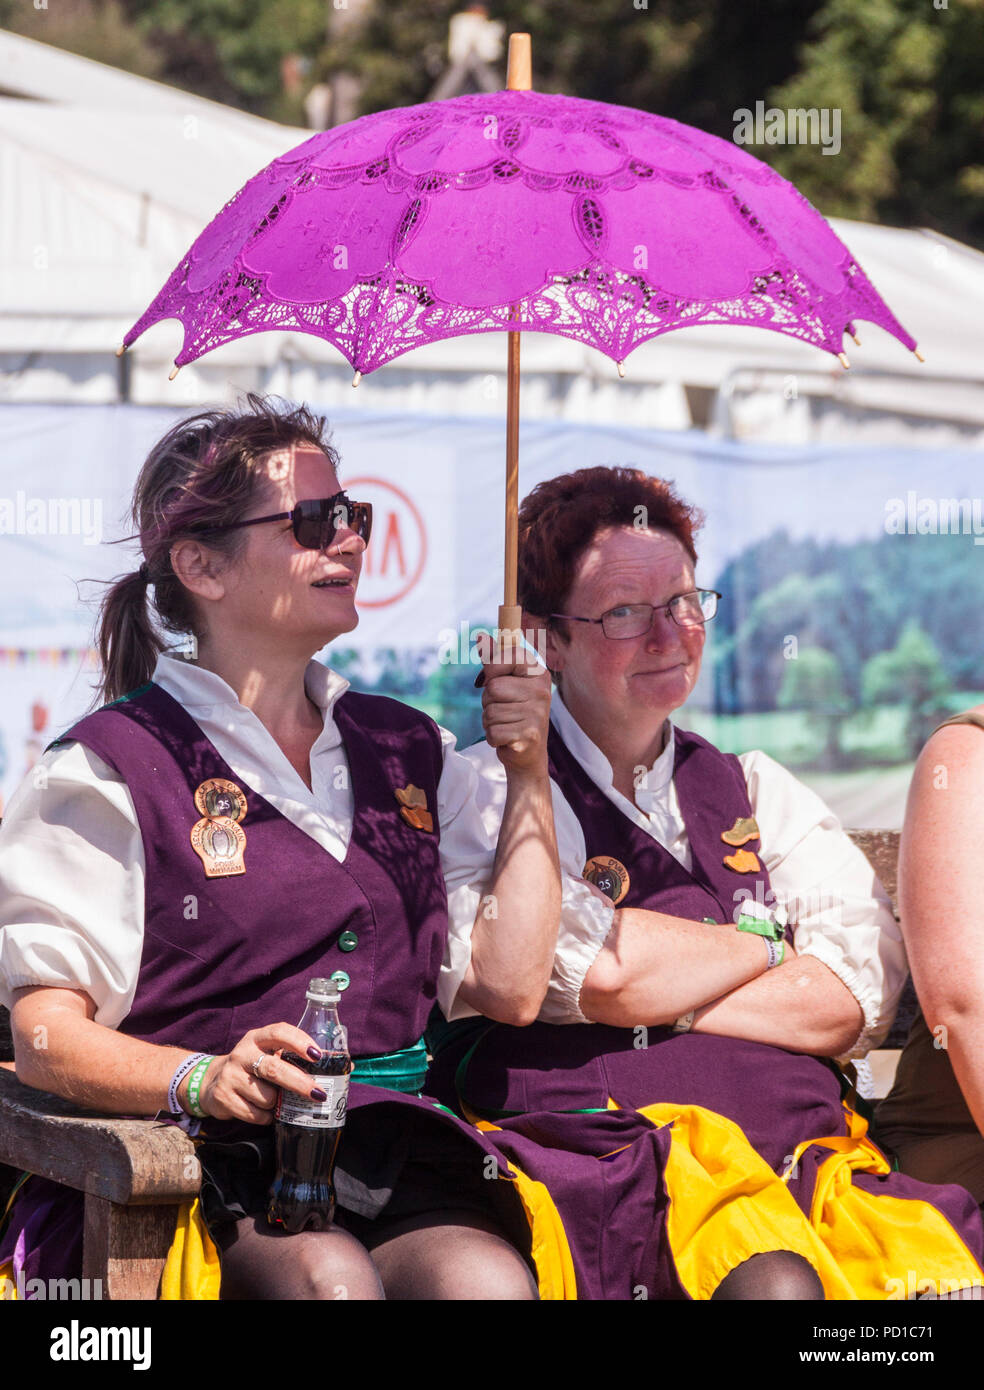 Sidmouth, UK 5th Aug 18 Clog dancers waiting their turn at Sidmouth Folk Festival cool off under a parasol as temperatures again soar on the Devon coast. Photo Central / Alamy Live News Stock Photo